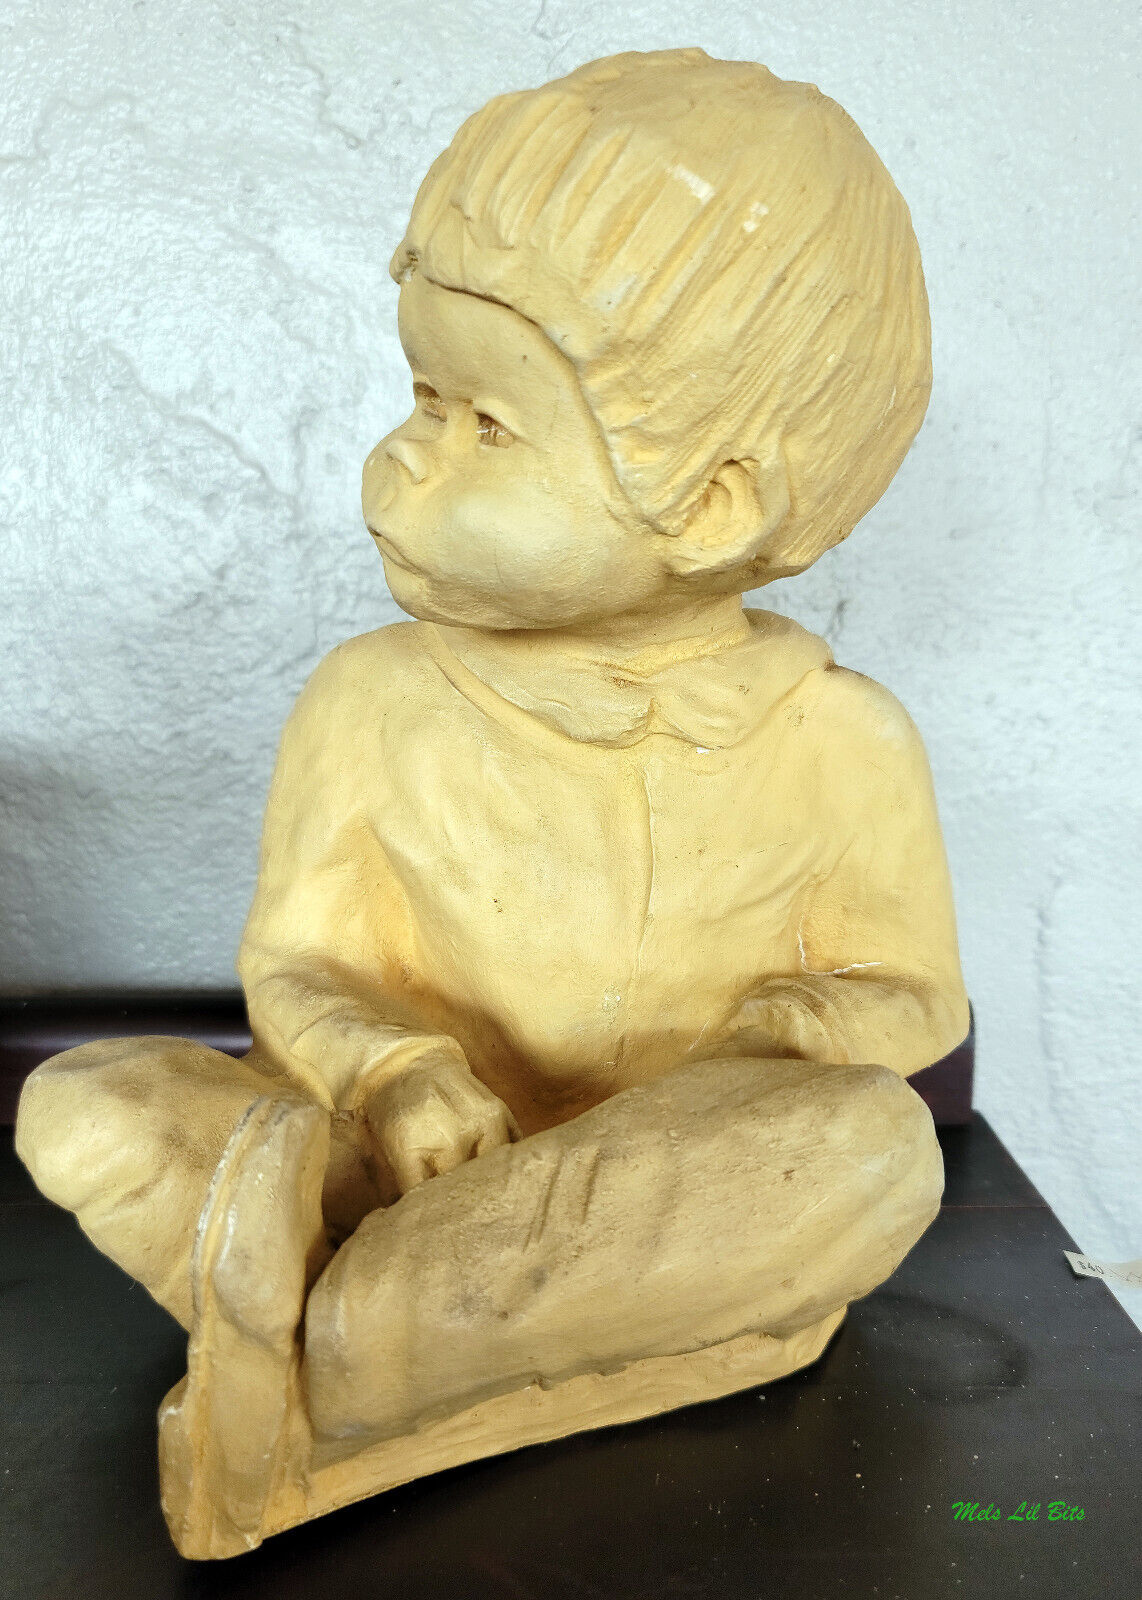 Vintage 1969 David Grossman Seated Boy Sculpture Signed and Dated